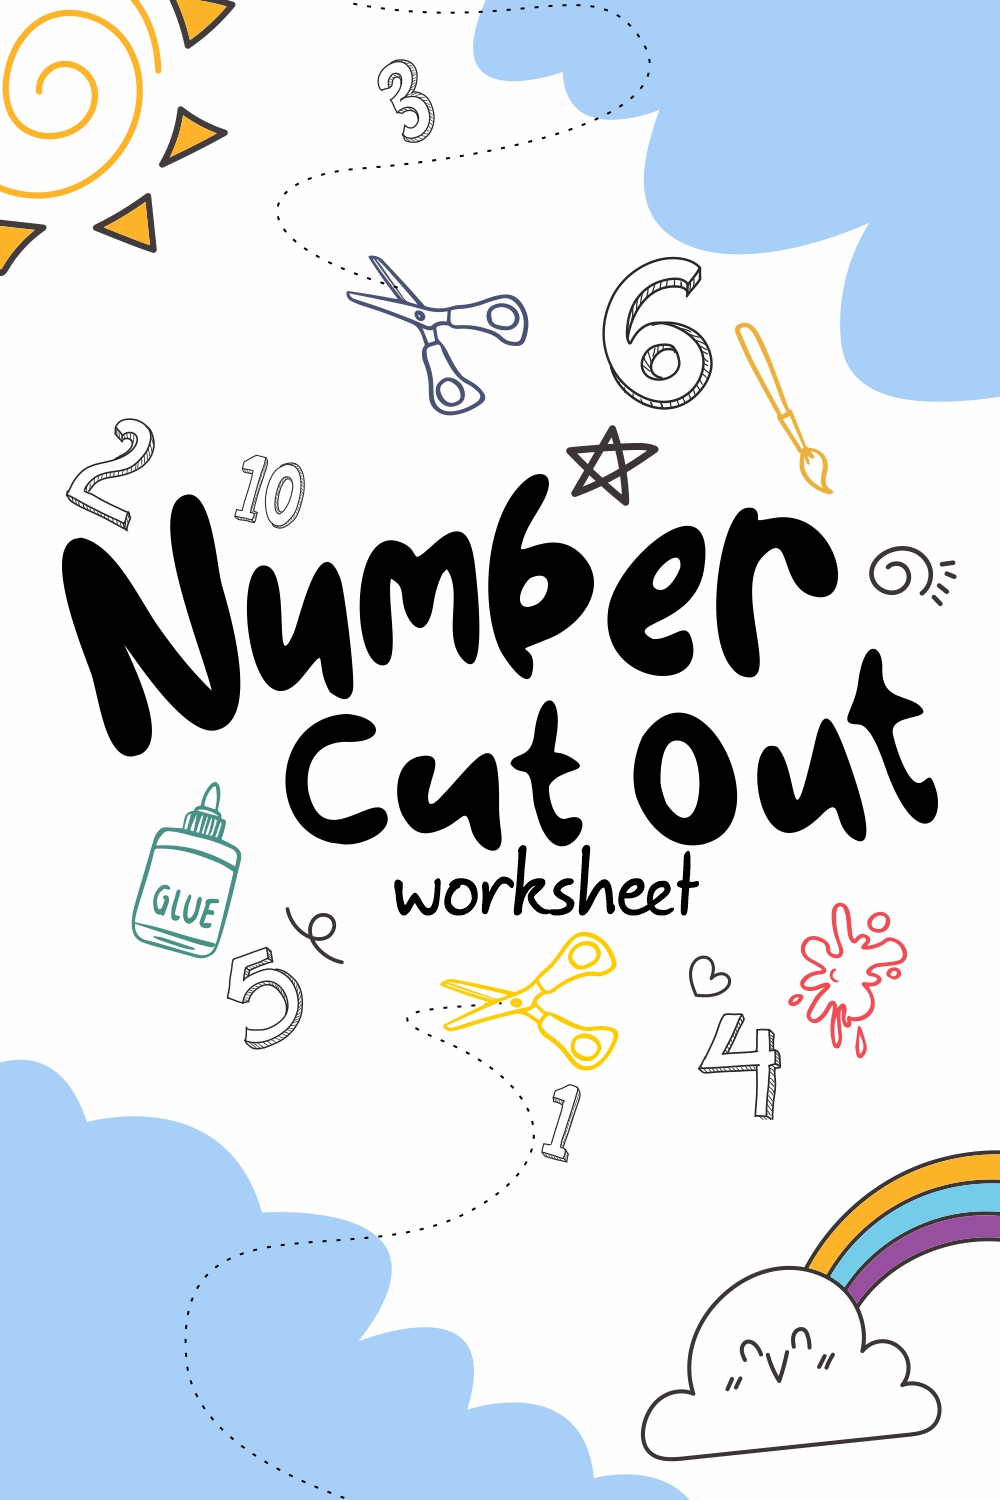 14 Images of Number Cut Out Worksheet